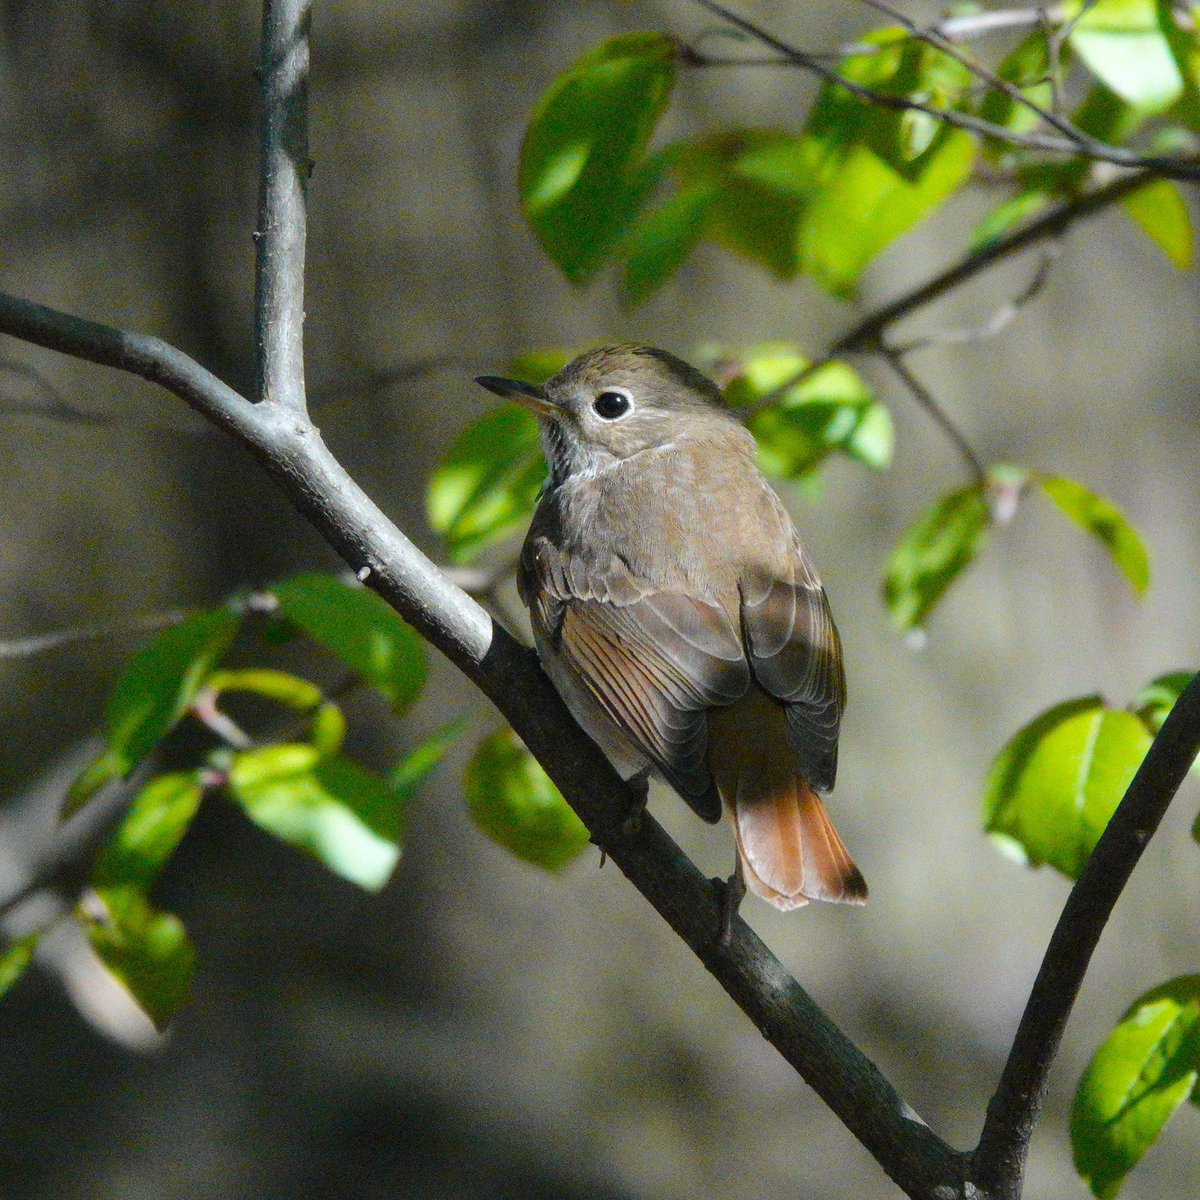 Hermit Thrush in the ramble. Many I’ve seen this migration have the more typical russet coloring. This bird looked more like individuals from western states with a grayish back and the russet tail coloring #birding #birdphotography #birdsofcentralpark #birds #birdcpp #birdcp